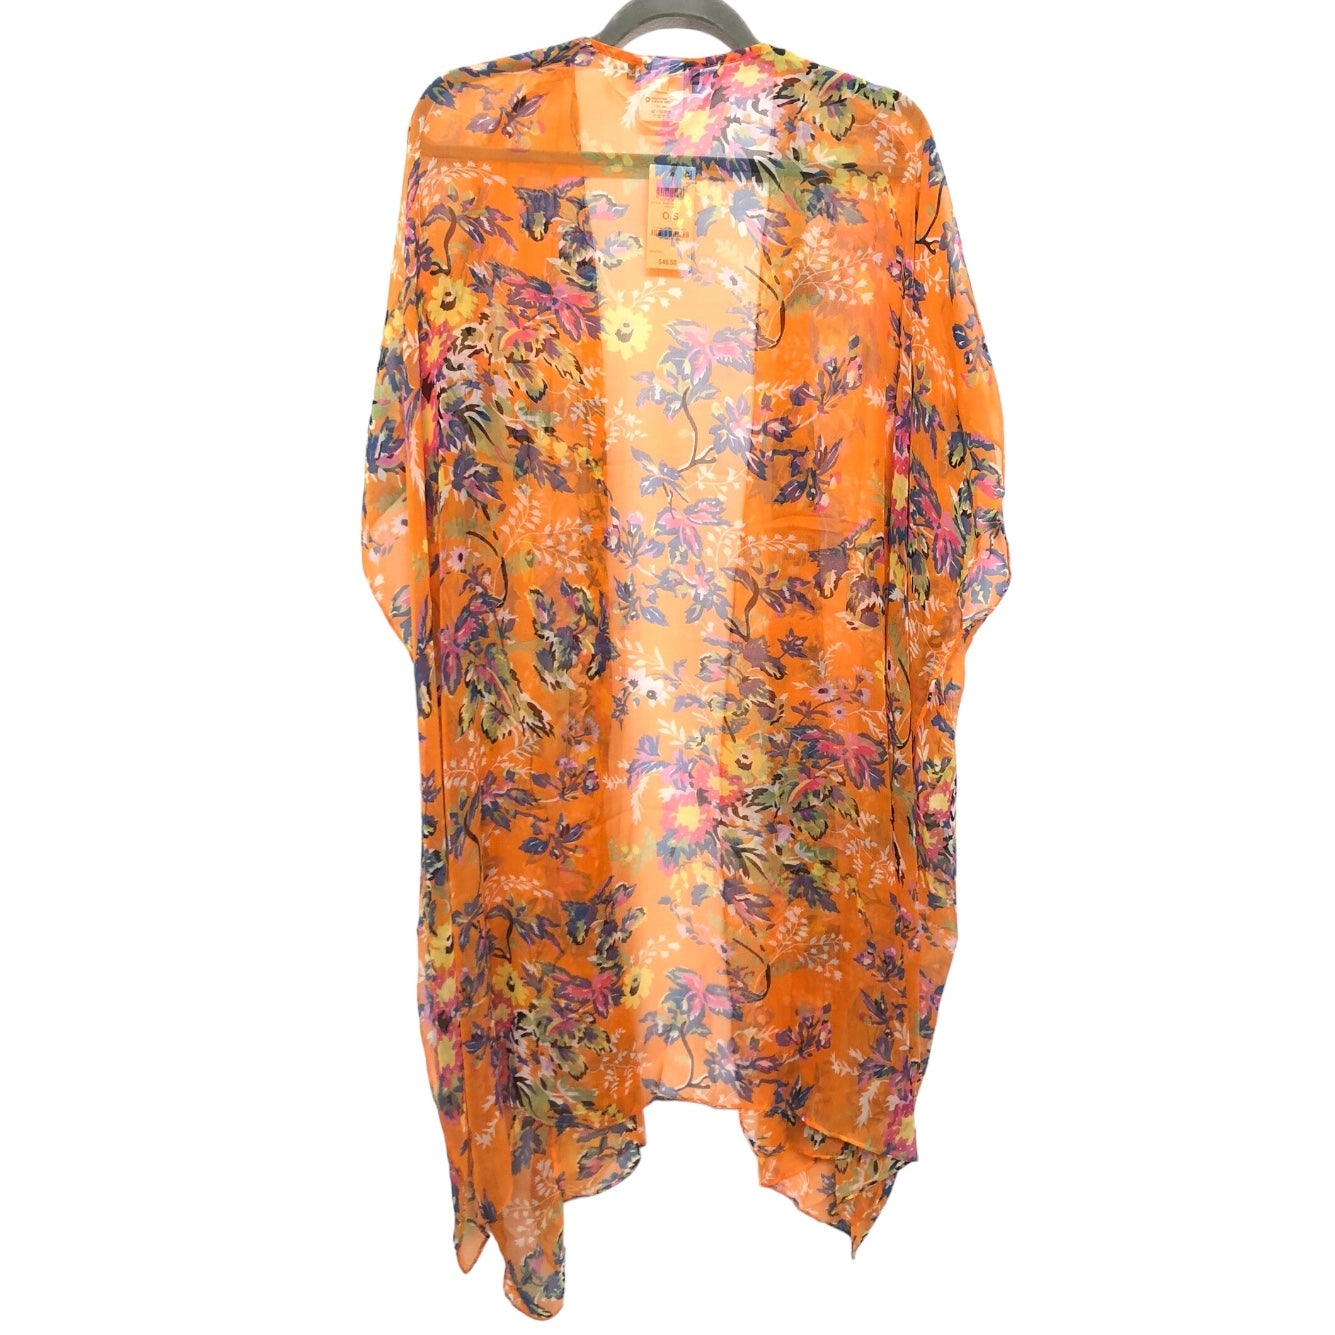 Floral Print Swimwear Cover-up Inc, Size Onesize